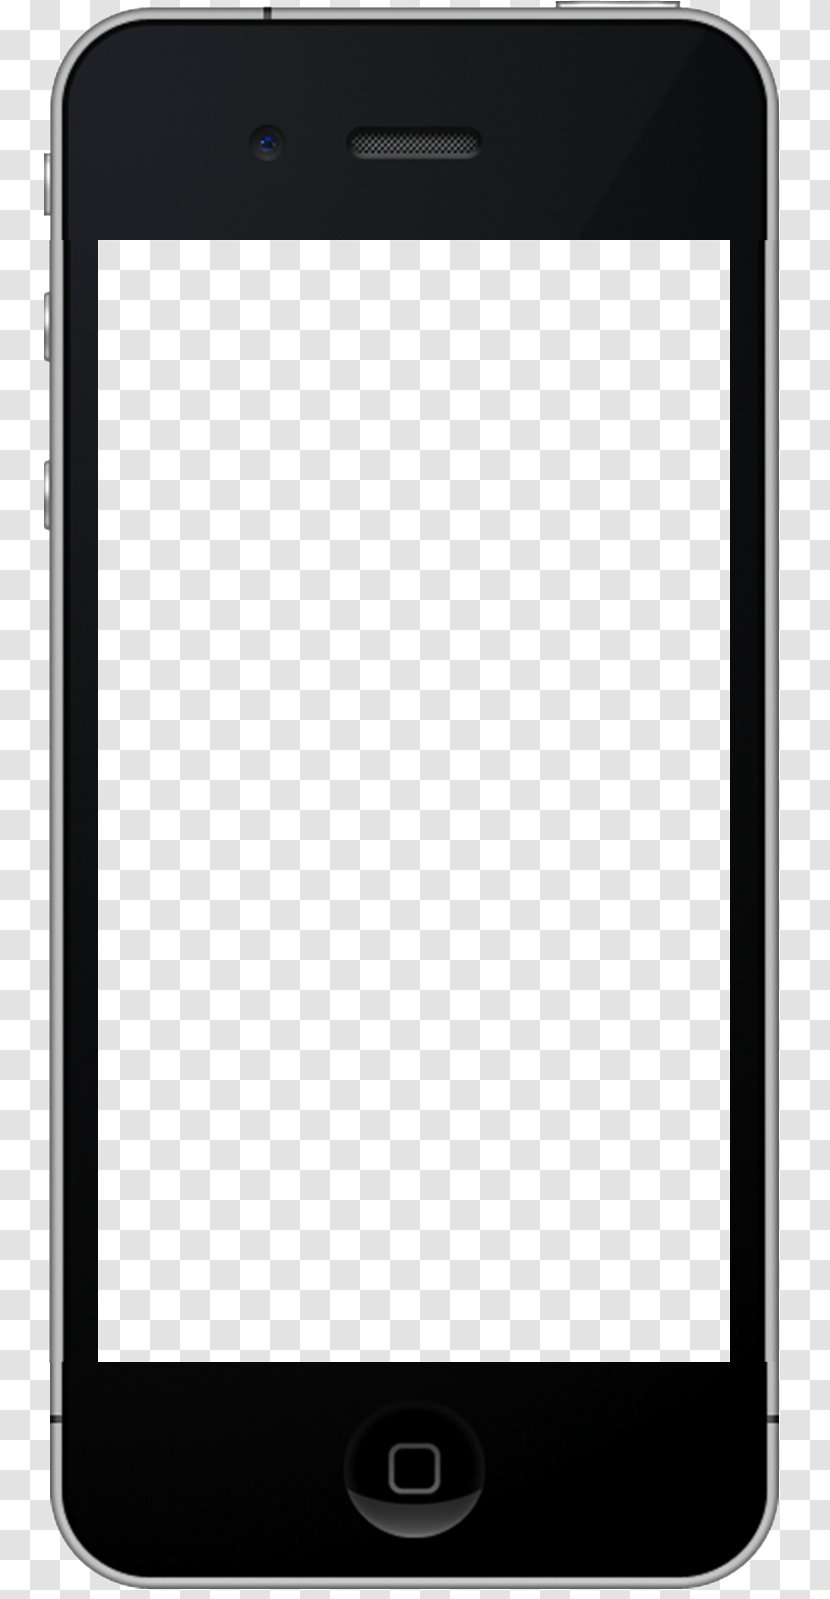 IPhone Smartphone Handheld Devices Telephone Clip Art - Feature Phone - Border Design Transparent PNG